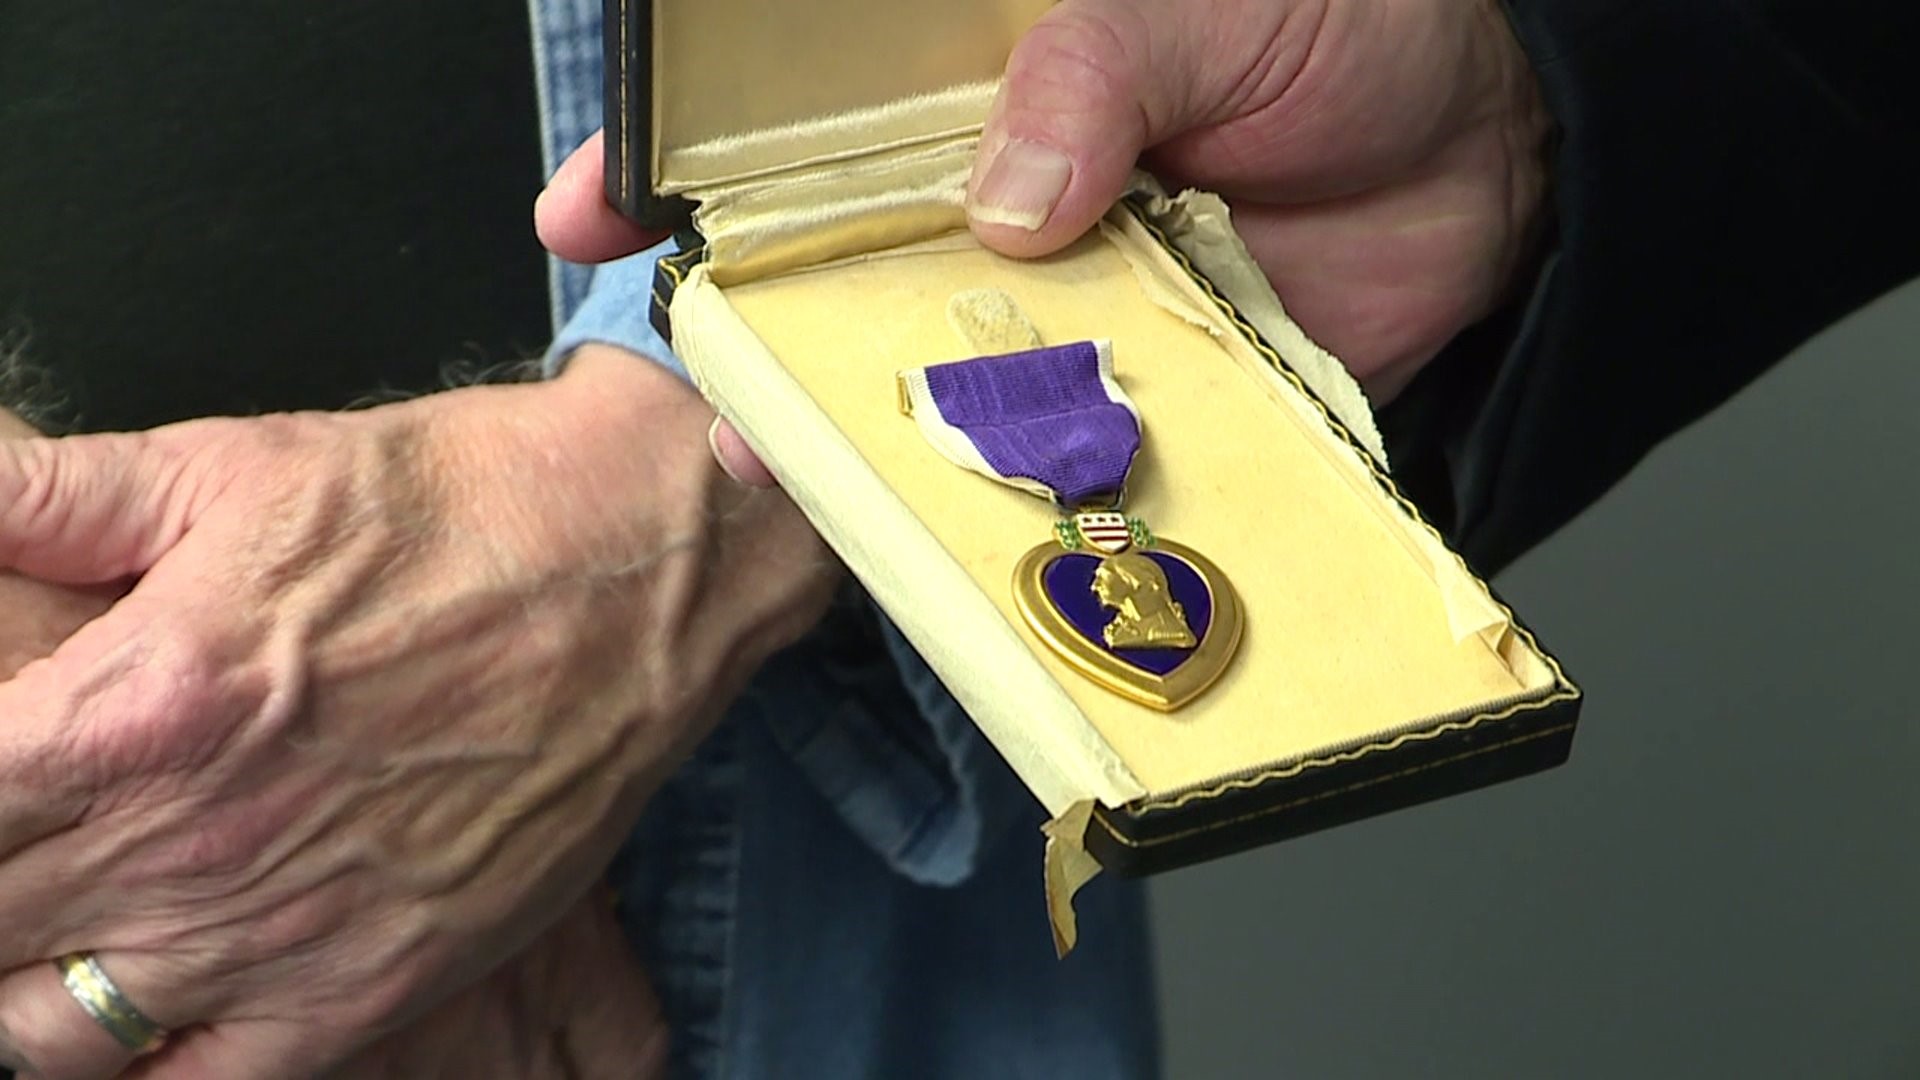 The family of a World War II veteran is reunited with his long-lost Purple Heart medal